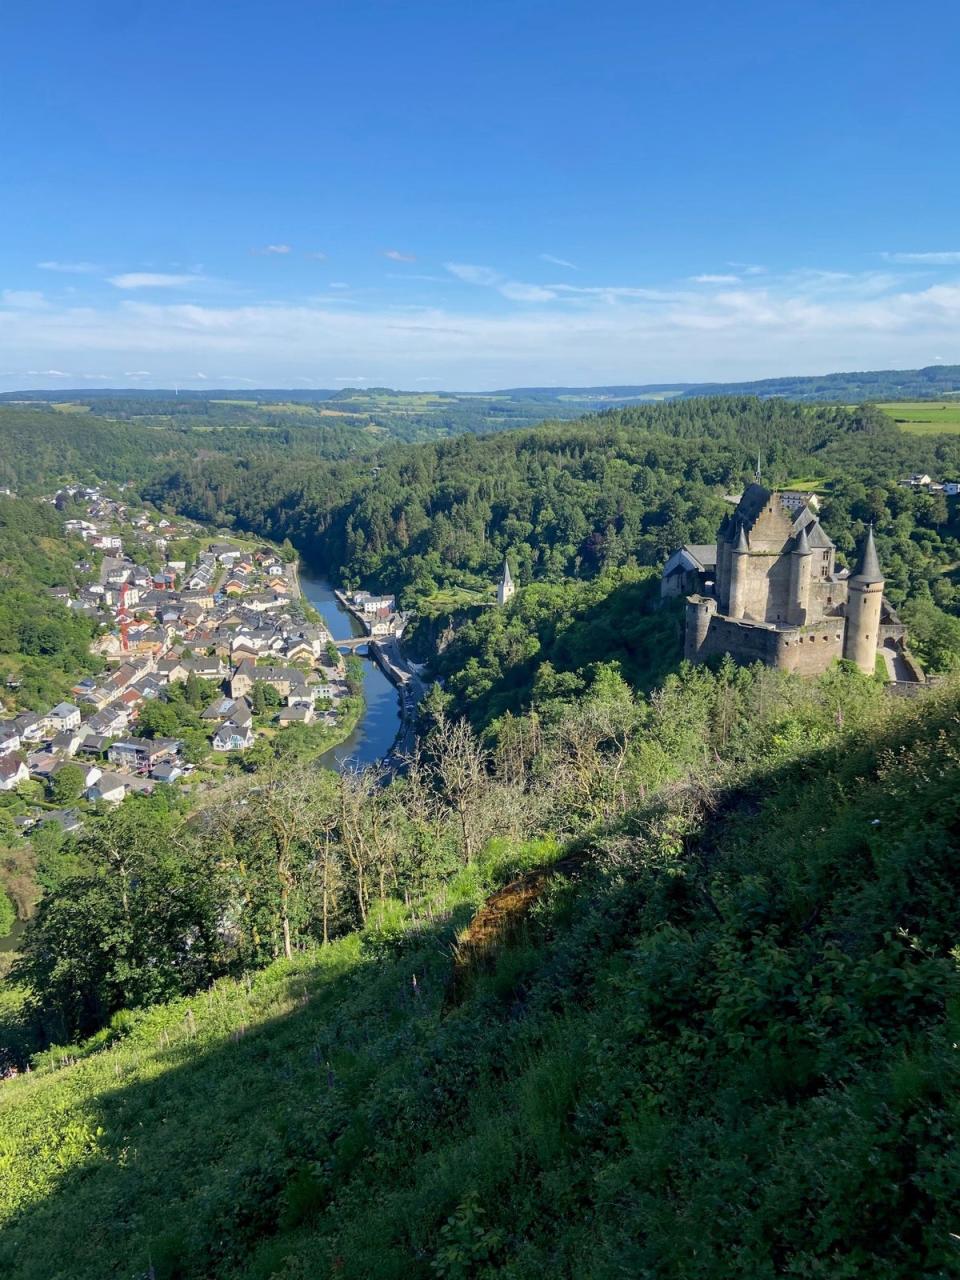 Luxembourg has no shortage of castles, including in Vianden in the country's north. (Matt Hryciw)